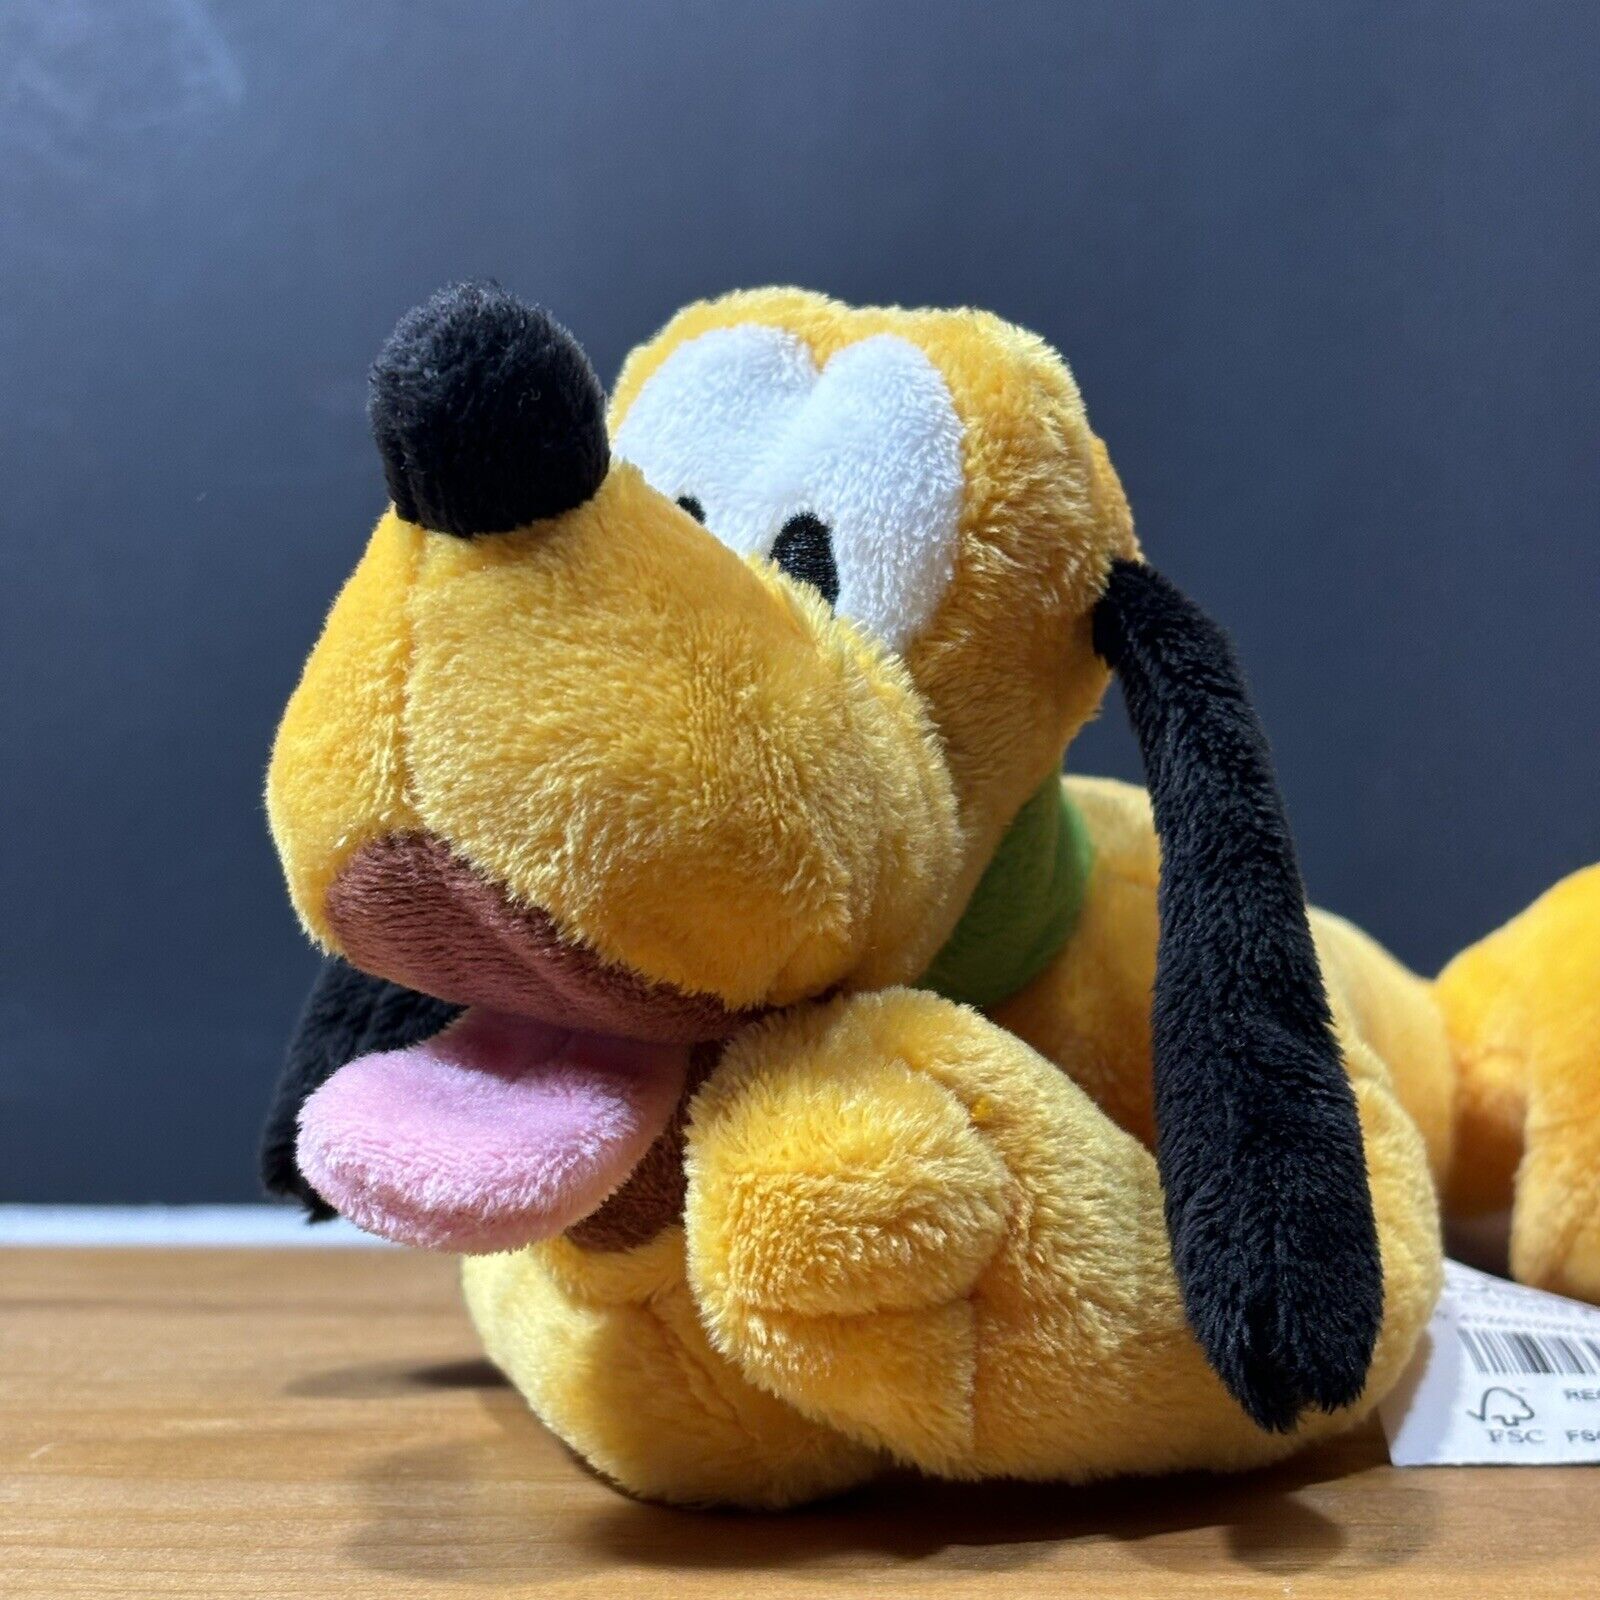 Disney Parks Pluto Plush Authentic 10” Stuffed Animal Toy Officially Licensed